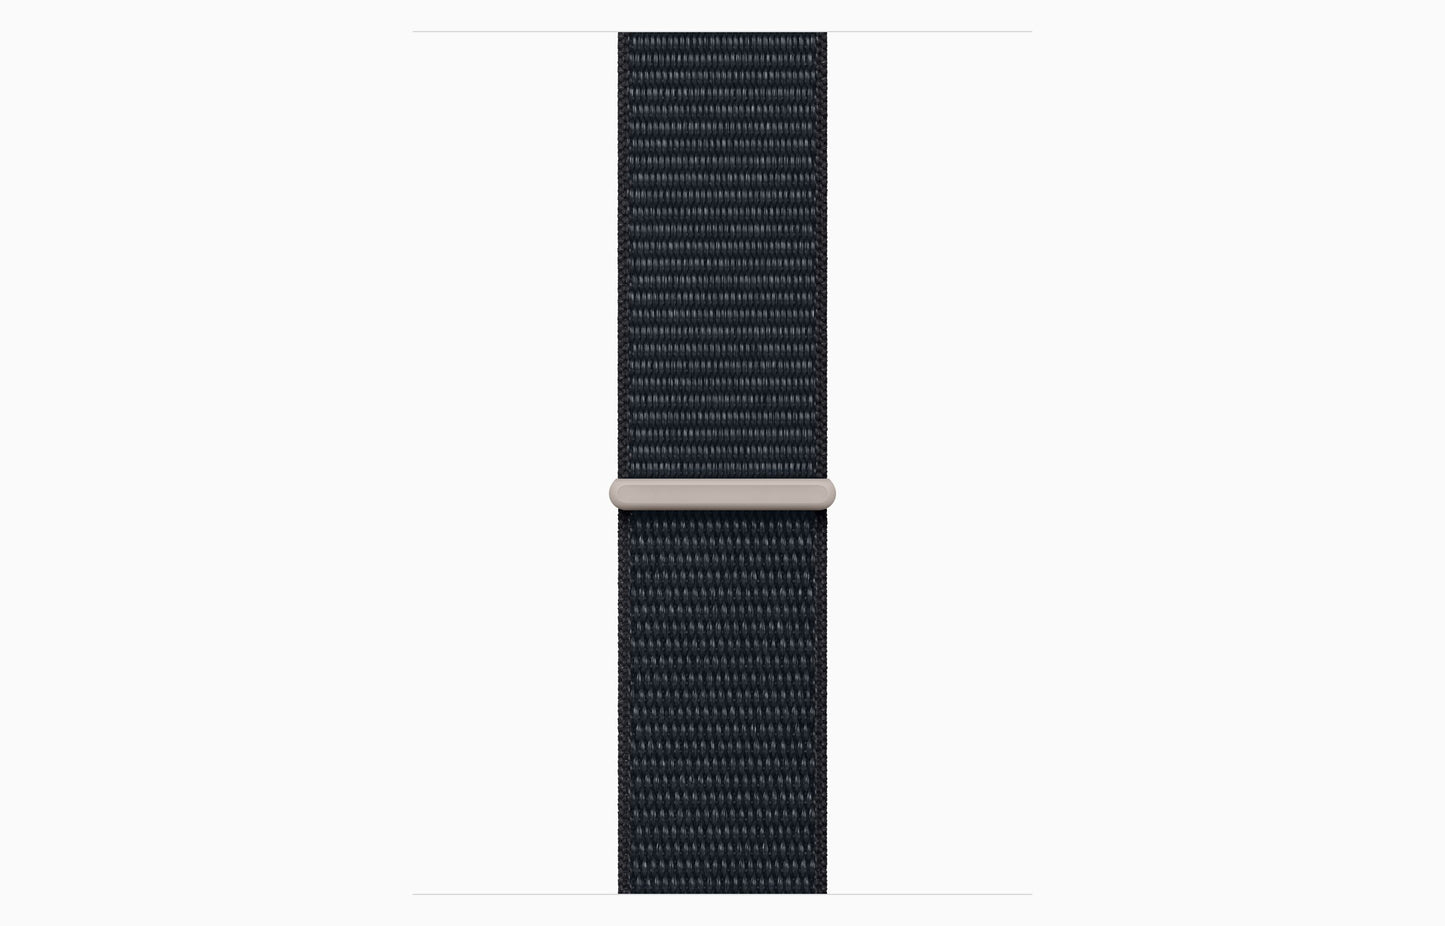 Apple Watch Series 9 Aluminum Case with Textile Sport Loop Band